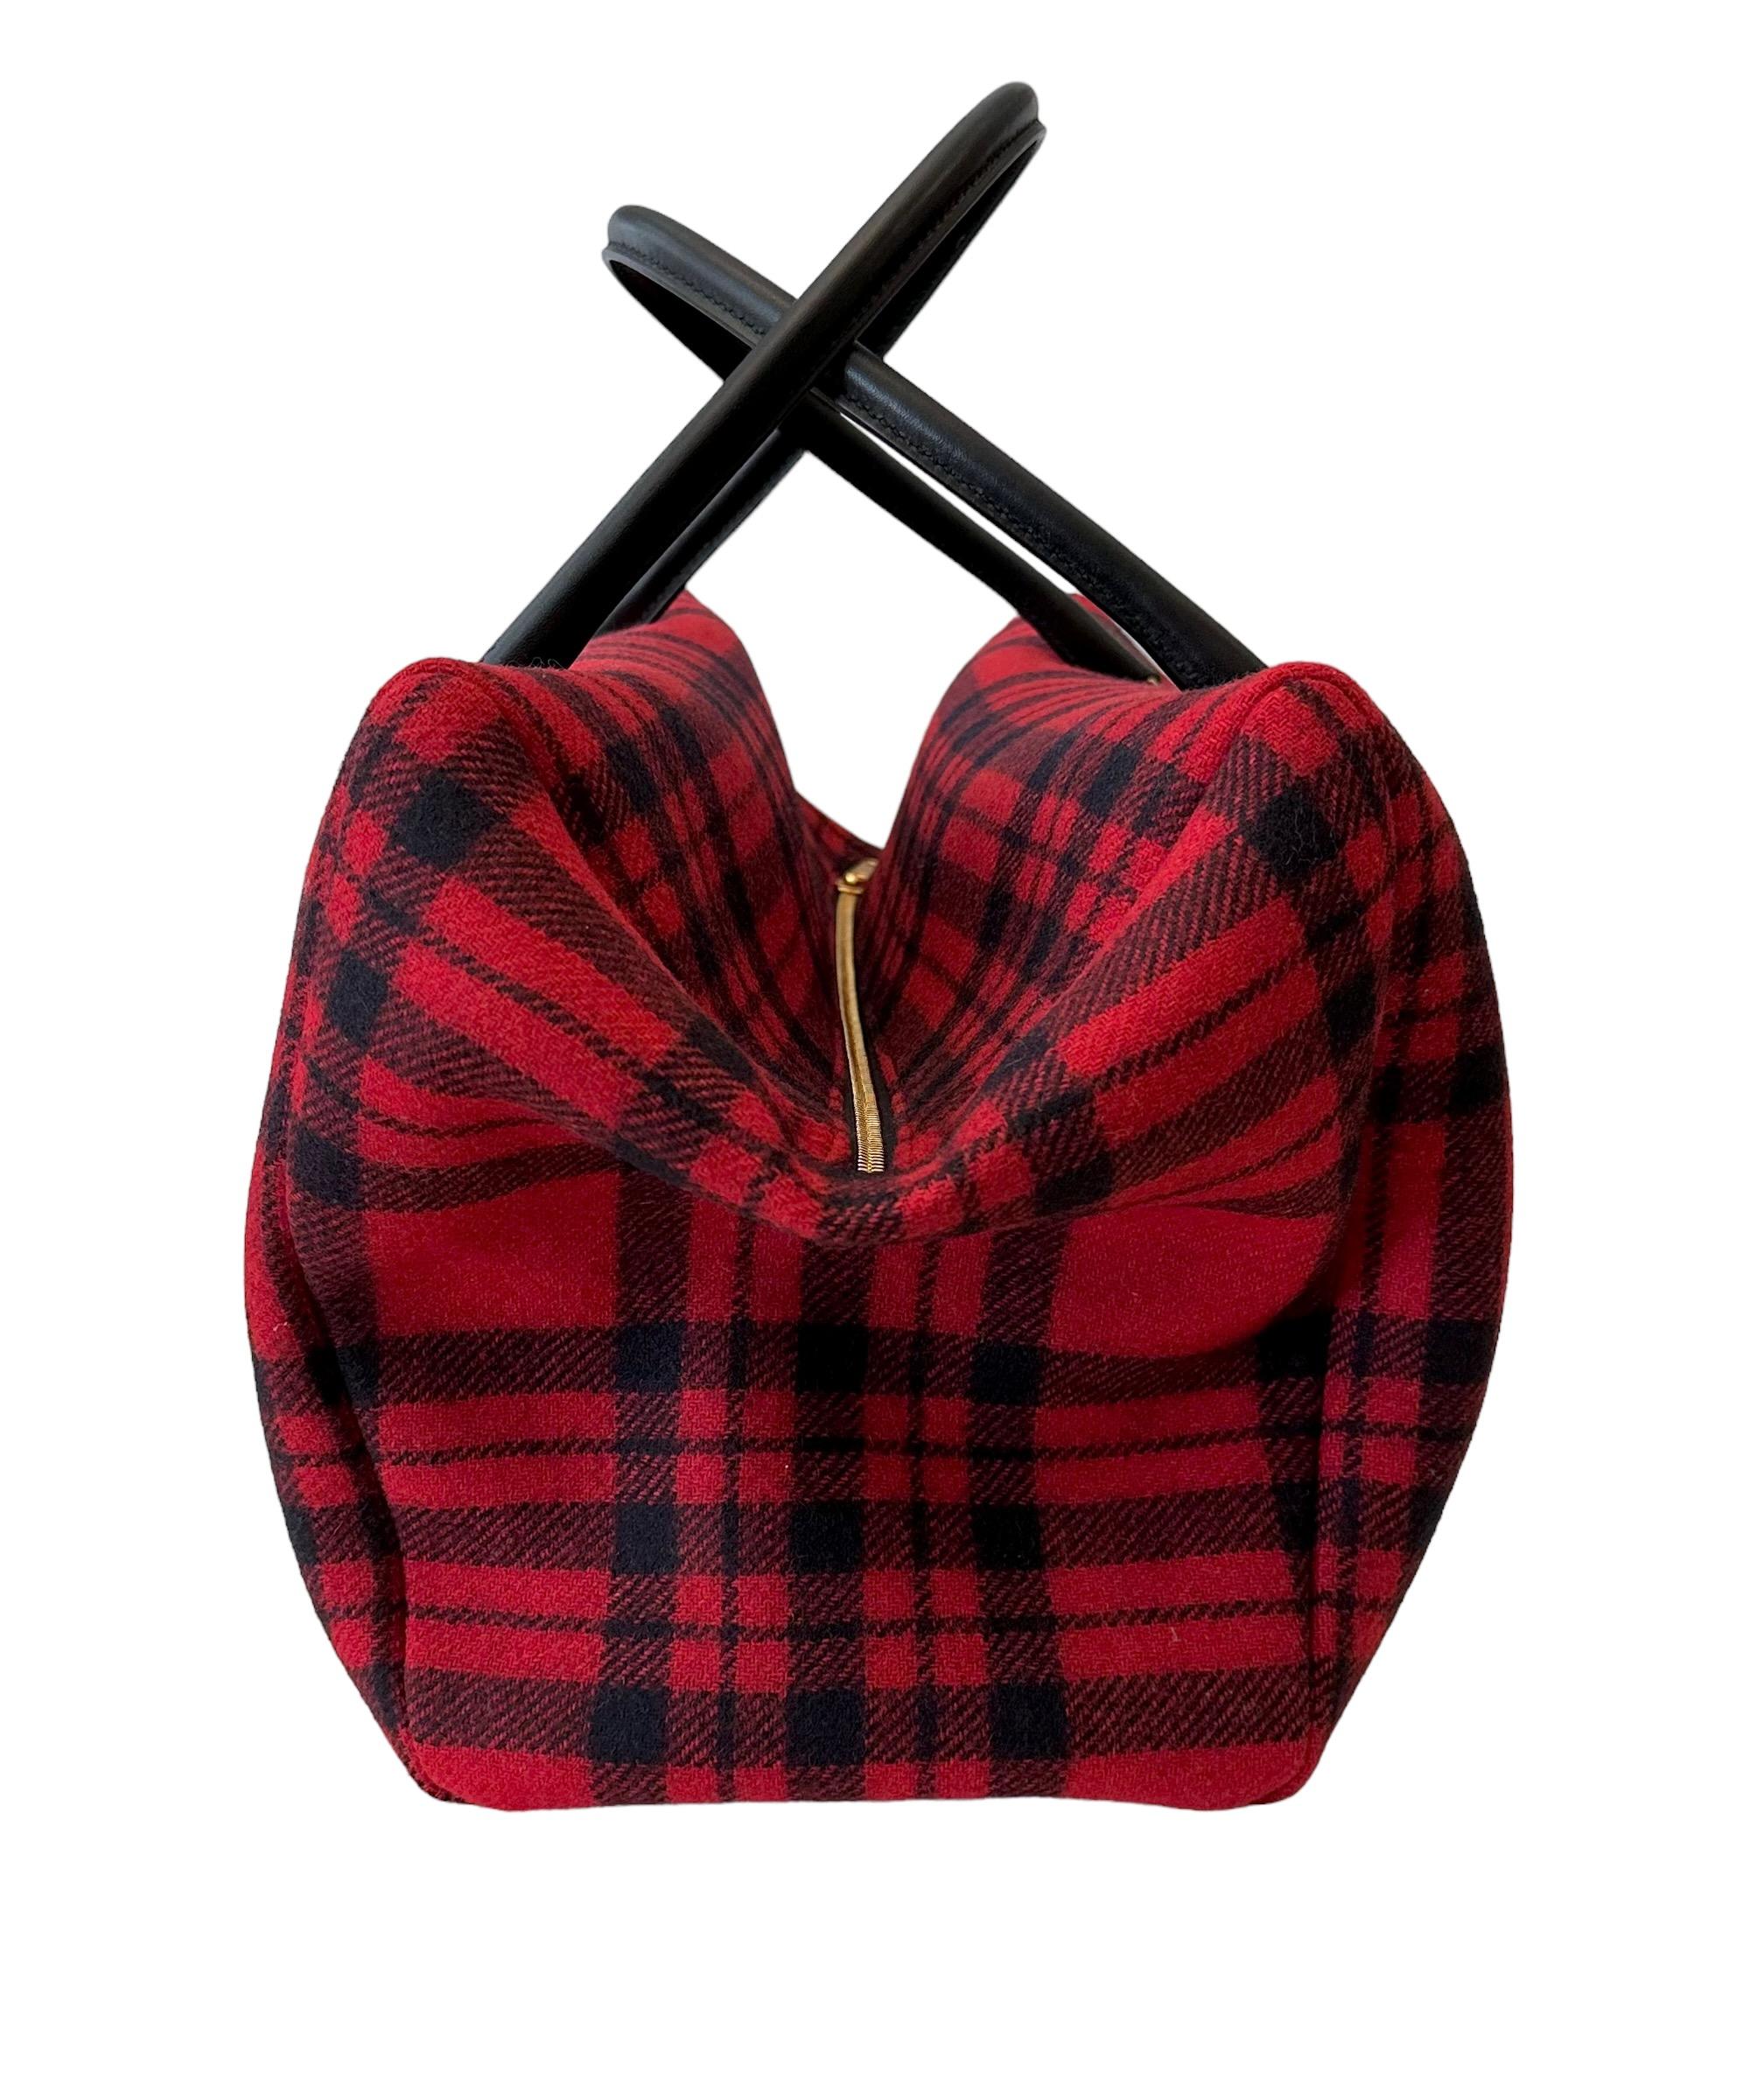 Céline Large Tartan Pliage Patapan Tote Bag In Excellent Condition For Sale In Geneva, CH